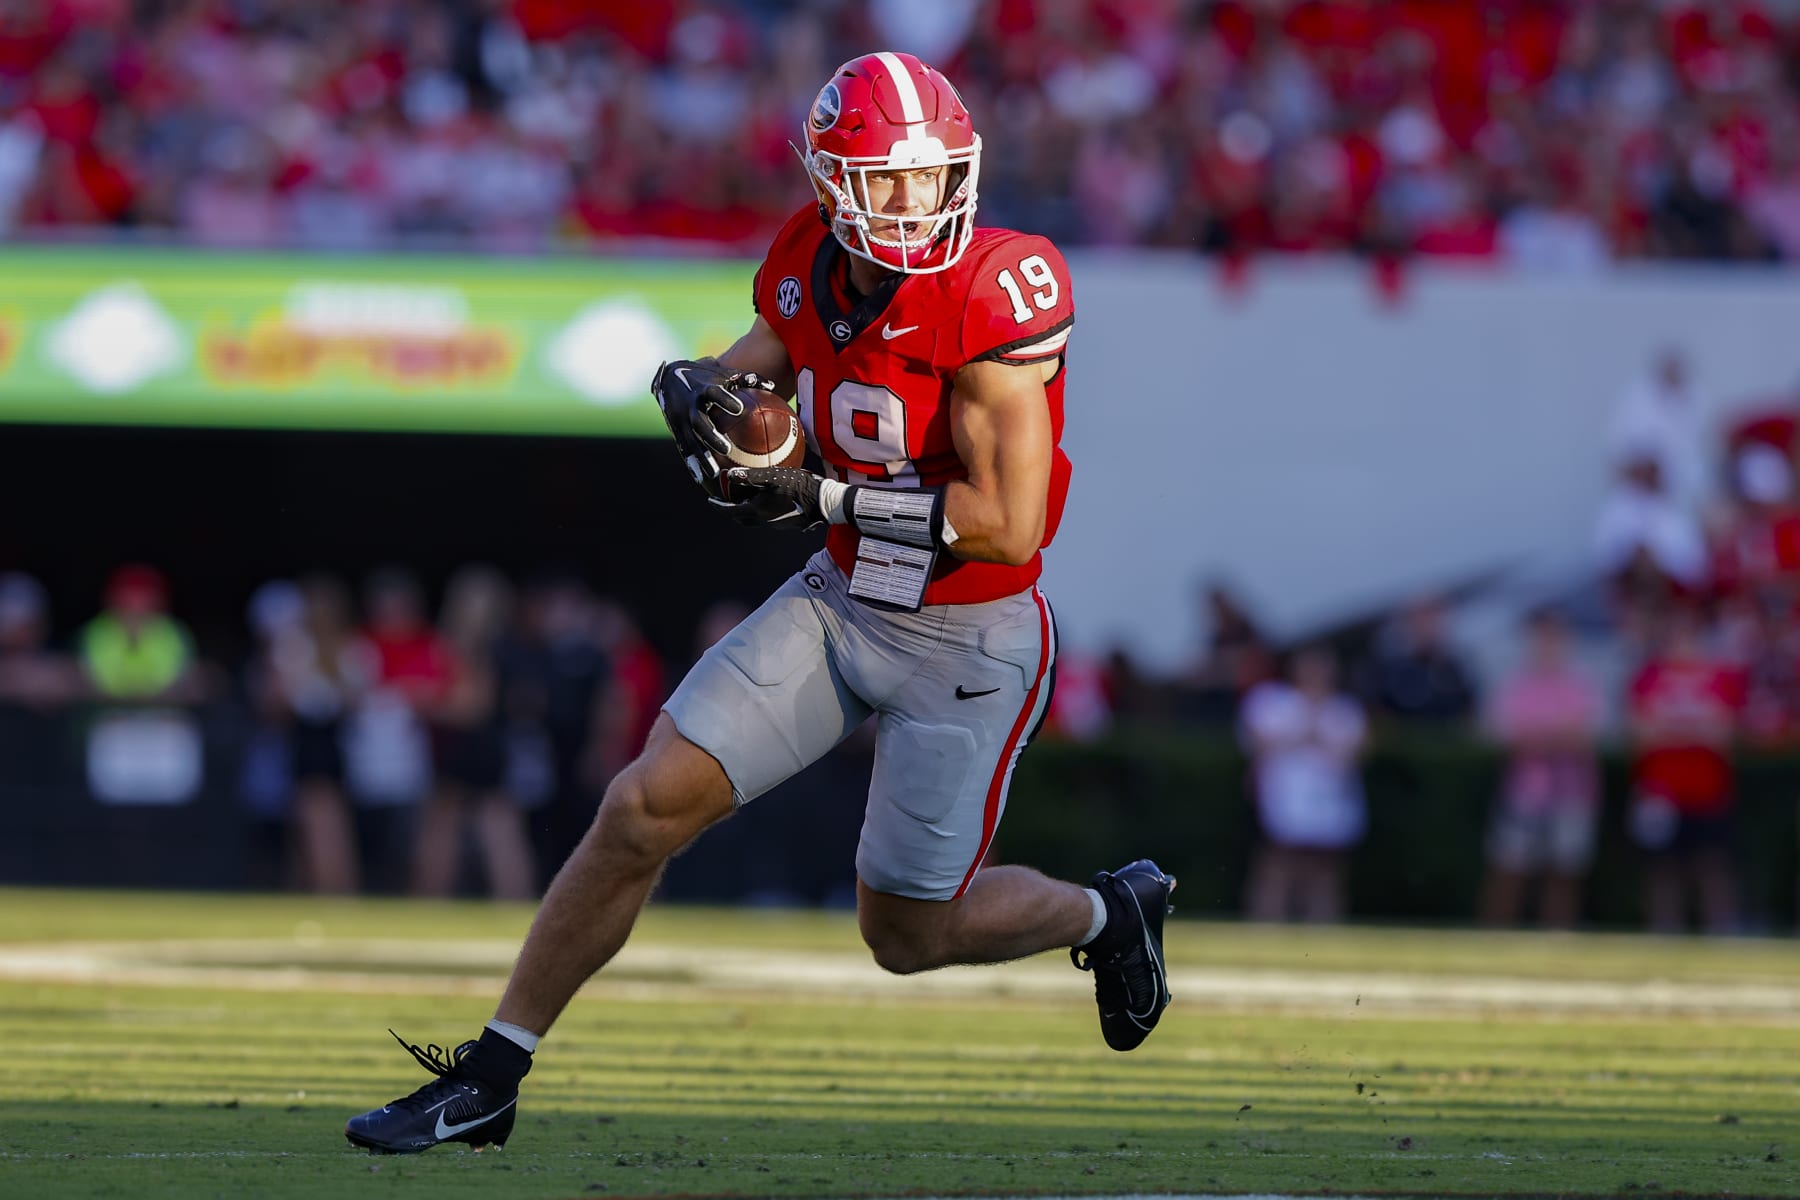 Brock Bowers: The NFL Draft's Coveted Gem Poised for Top Selection